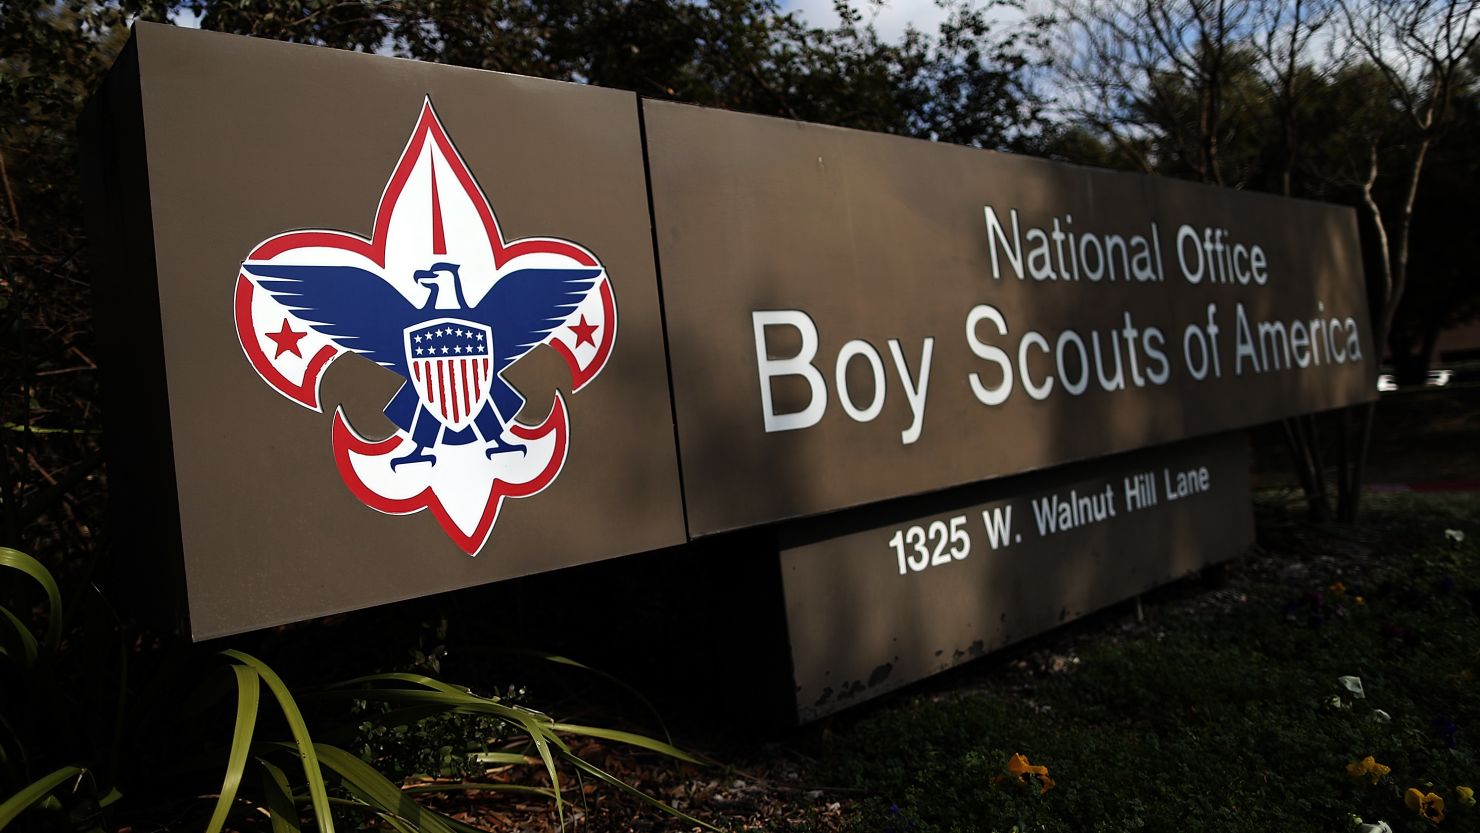 Boy Scouts National Office